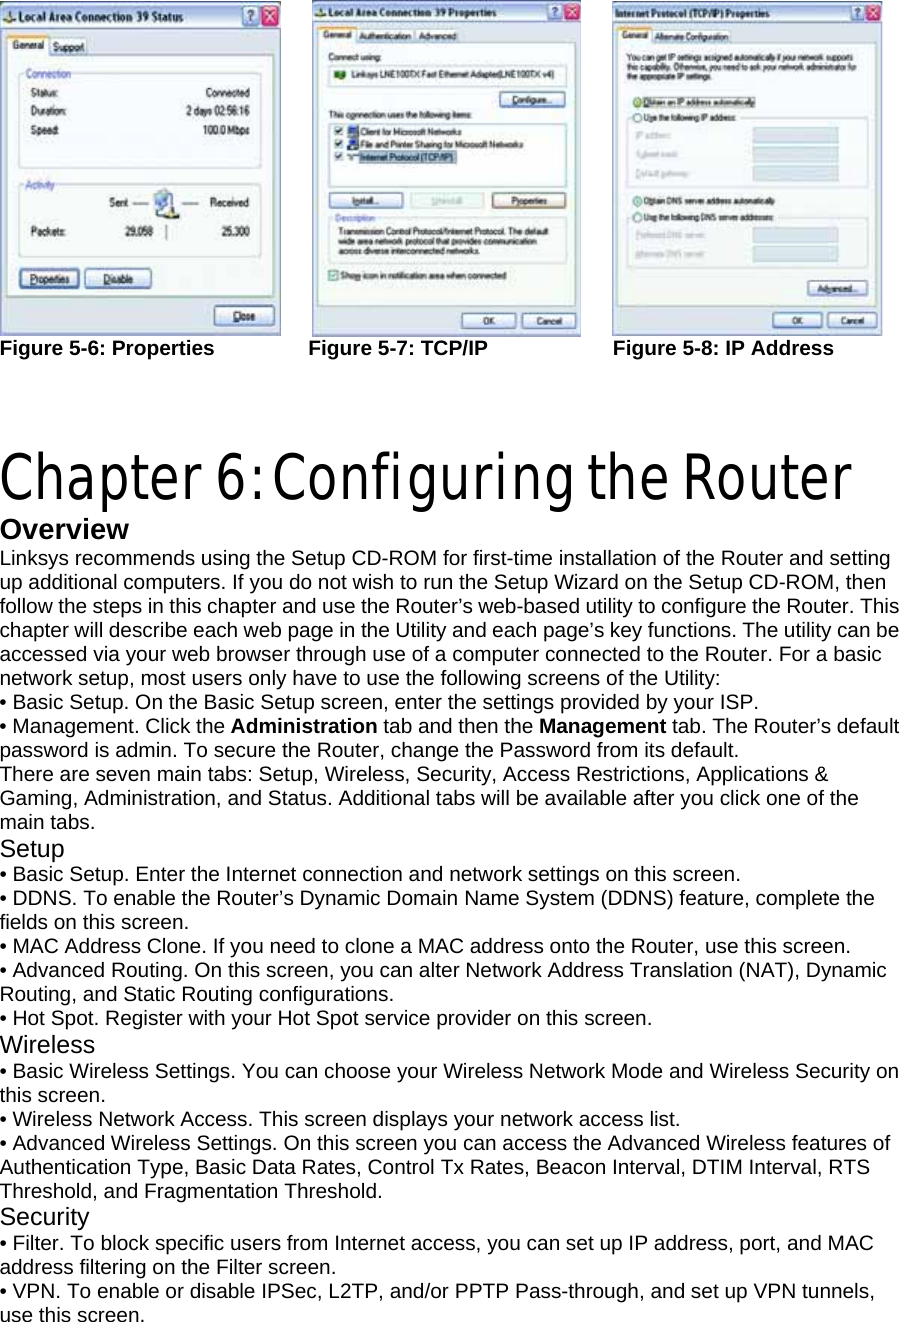          Figure 5-6: Properties         Figure 5-7: TCP/IP            Figure 5-8: IP Address     Chapter 6: Configuring the Router Overview Linksys recommends using the Setup CD-ROM for first-time installation of the Router and setting up additional computers. If you do not wish to run the Setup Wizard on the Setup CD-ROM, then follow the steps in this chapter and use the Router’s web-based utility to configure the Router. This chapter will describe each web page in the Utility and each page’s key functions. The utility can be accessed via your web browser through use of a computer connected to the Router. For a basic network setup, most users only have to use the following screens of the Utility: • Basic Setup. On the Basic Setup screen, enter the settings provided by your ISP. • Management. Click the Administration tab and then the Management tab. The Router’s default password is admin. To secure the Router, change the Password from its default. There are seven main tabs: Setup, Wireless, Security, Access Restrictions, Applications &amp; Gaming, Administration, and Status. Additional tabs will be available after you click one of the main tabs. Setup • Basic Setup. Enter the Internet connection and network settings on this screen. • DDNS. To enable the Router’s Dynamic Domain Name System (DDNS) feature, complete the fields on this screen. • MAC Address Clone. If you need to clone a MAC address onto the Router, use this screen. • Advanced Routing. On this screen, you can alter Network Address Translation (NAT), Dynamic Routing, and Static Routing configurations. • Hot Spot. Register with your Hot Spot service provider on this screen. Wireless • Basic Wireless Settings. You can choose your Wireless Network Mode and Wireless Security on this screen. • Wireless Network Access. This screen displays your network access list. • Advanced Wireless Settings. On this screen you can access the Advanced Wireless features of Authentication Type, Basic Data Rates, Control Tx Rates, Beacon Interval, DTIM Interval, RTS Threshold, and Fragmentation Threshold. Security • Filter. To block specific users from Internet access, you can set up IP address, port, and MAC address filtering on the Filter screen. • VPN. To enable or disable IPSec, L2TP, and/or PPTP Pass-through, and set up VPN tunnels, use this screen. 